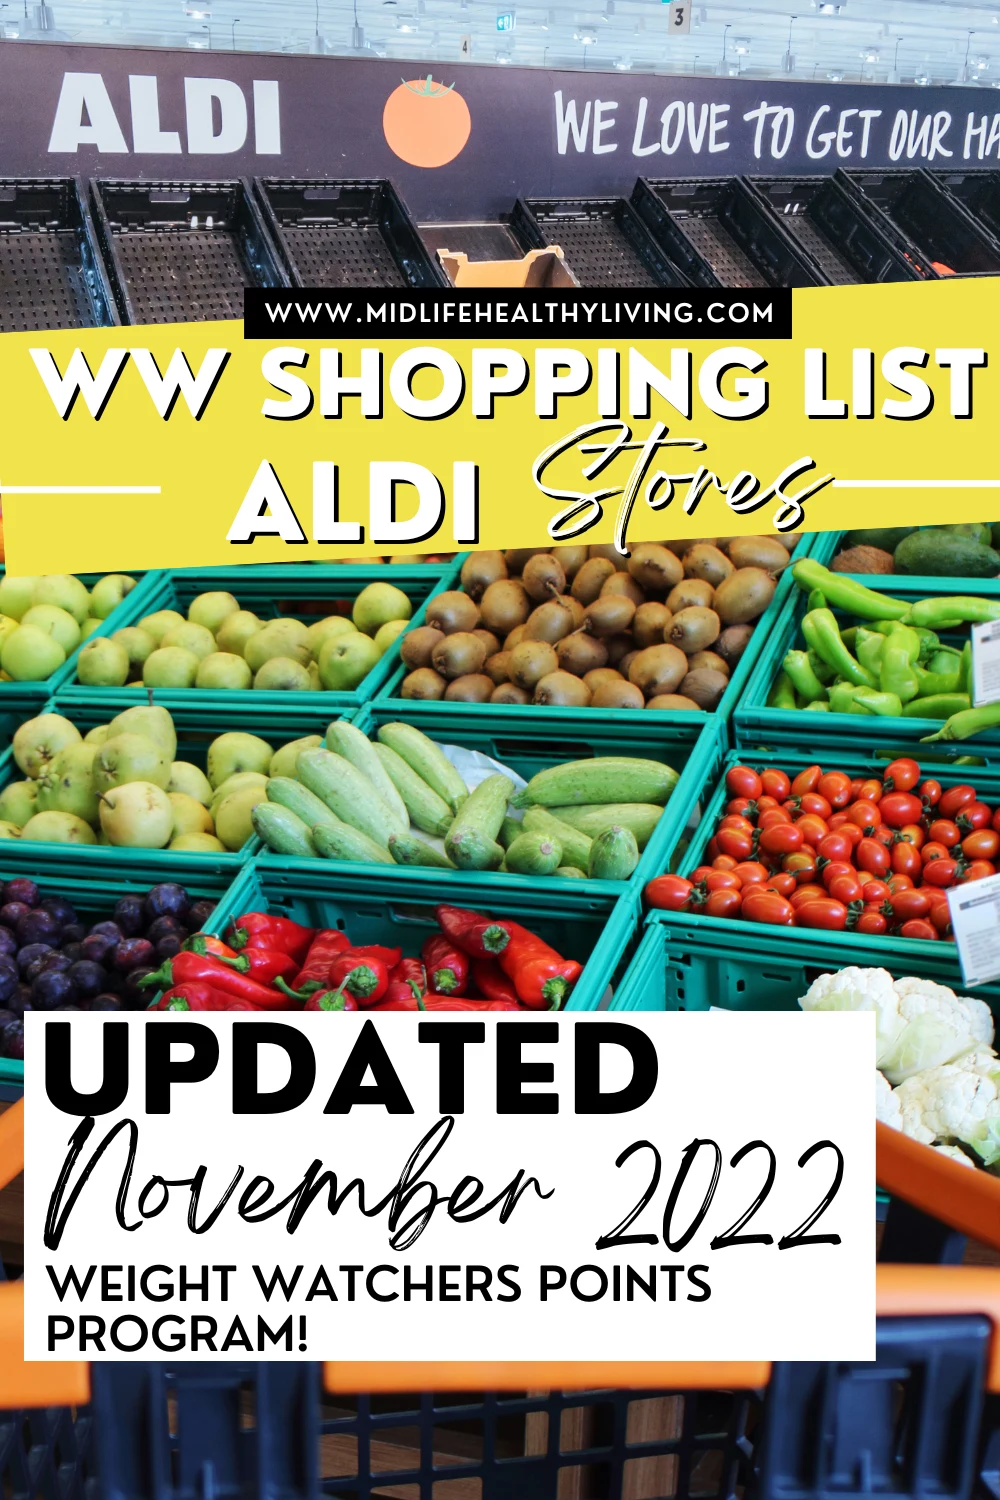 All the home essentials you need from Aldi's middle aisle - the